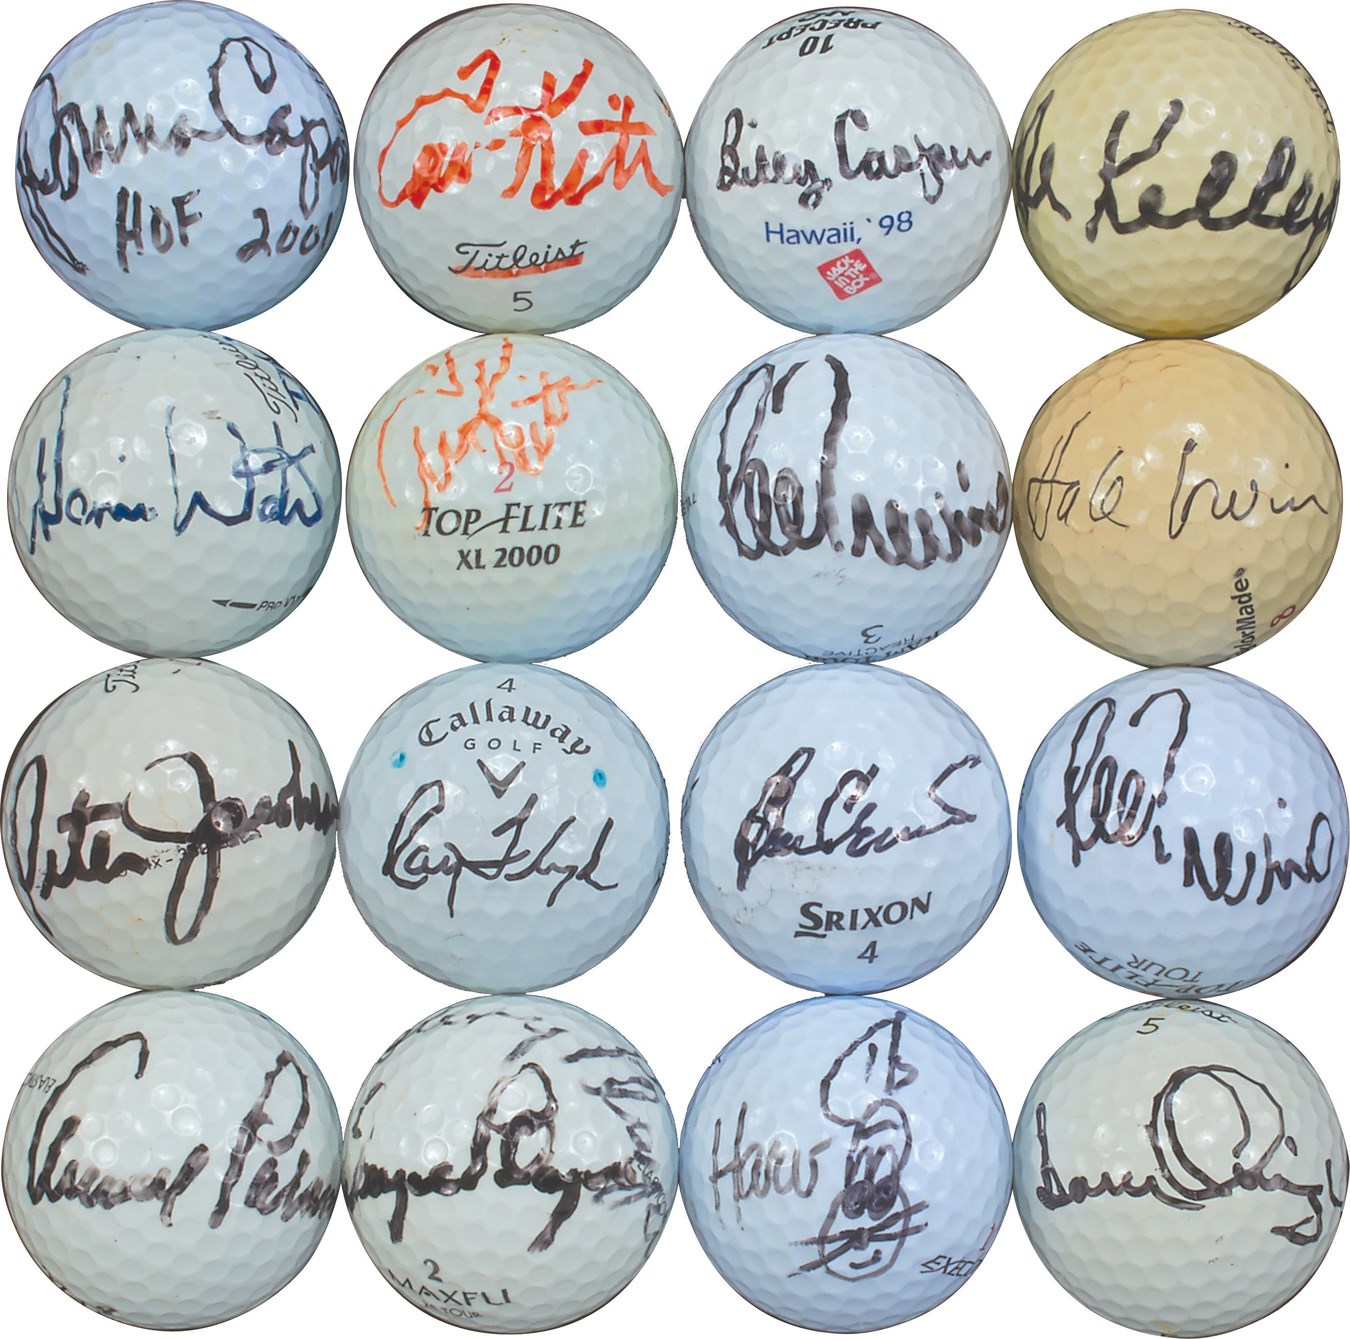 Olympics and All Sports - Nice Signed Golf Collection with Jack Nicklaus & Arnold Palmer (90+)